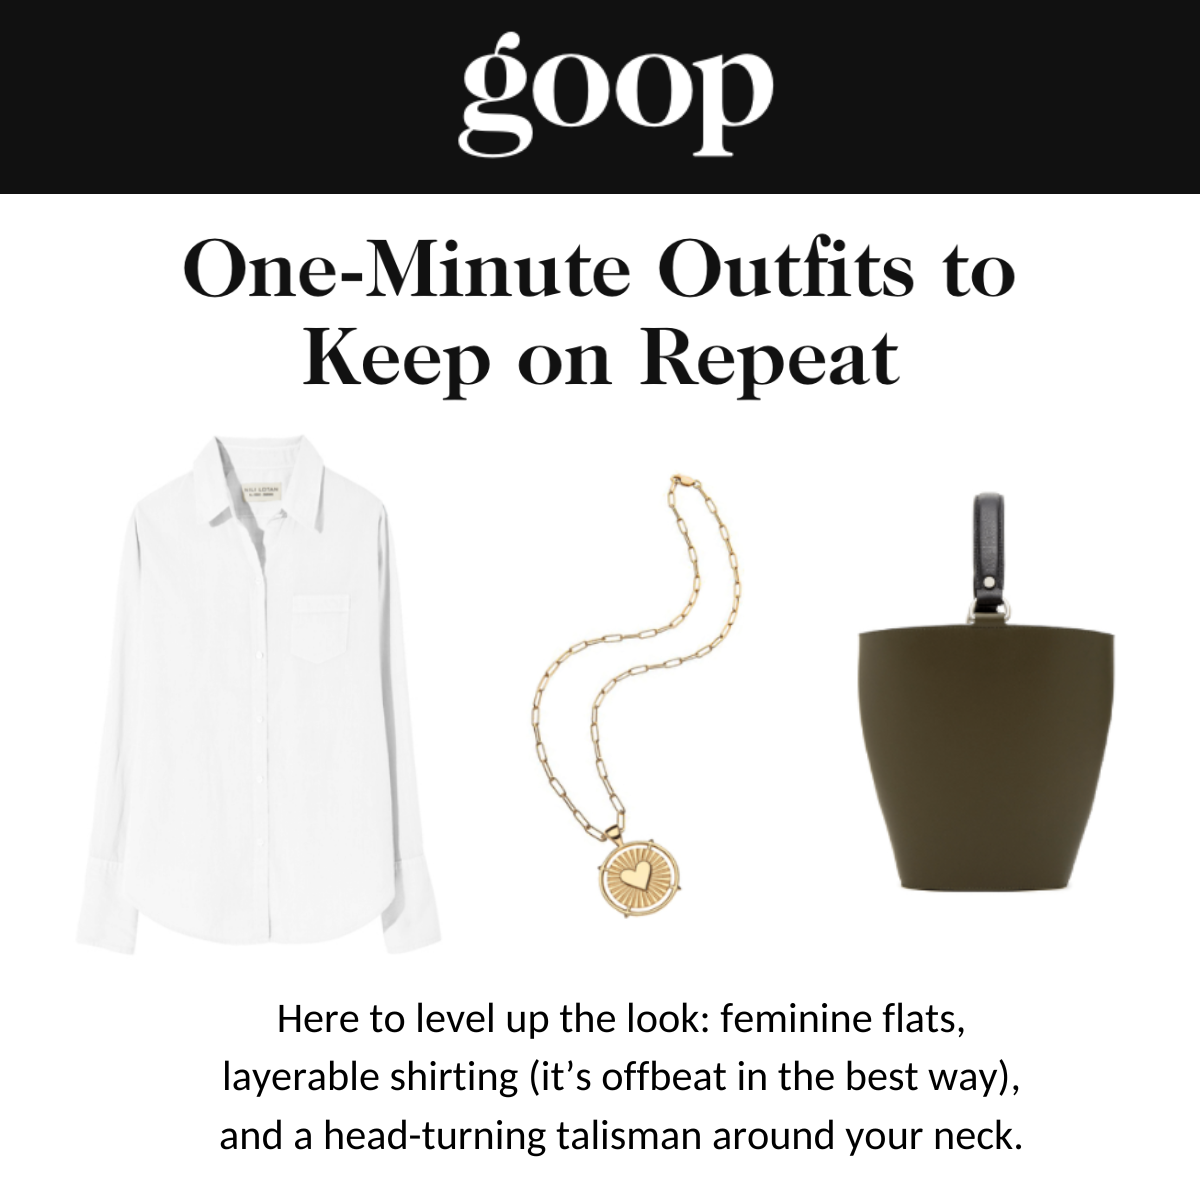 Press Highlight: Goop's One-Minute Outfits to Keep on Repeat